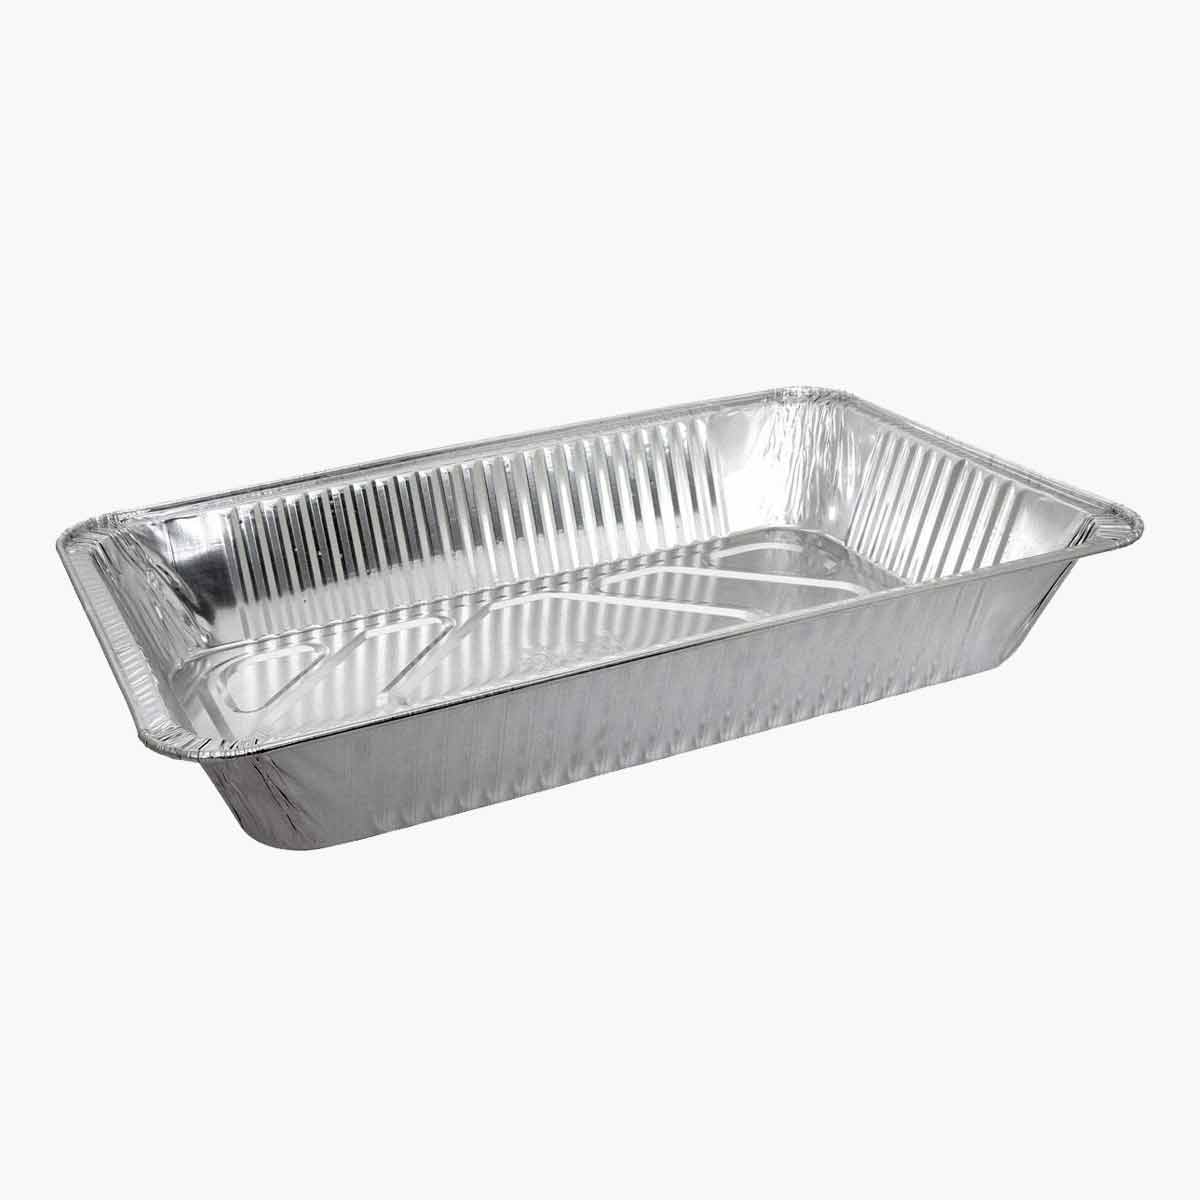 A foil roasting pan, discussed in the podcast Talking With My Mouth Full, Ep. 37: Your Thanksgiving Questions Answered, 2020 Edition.